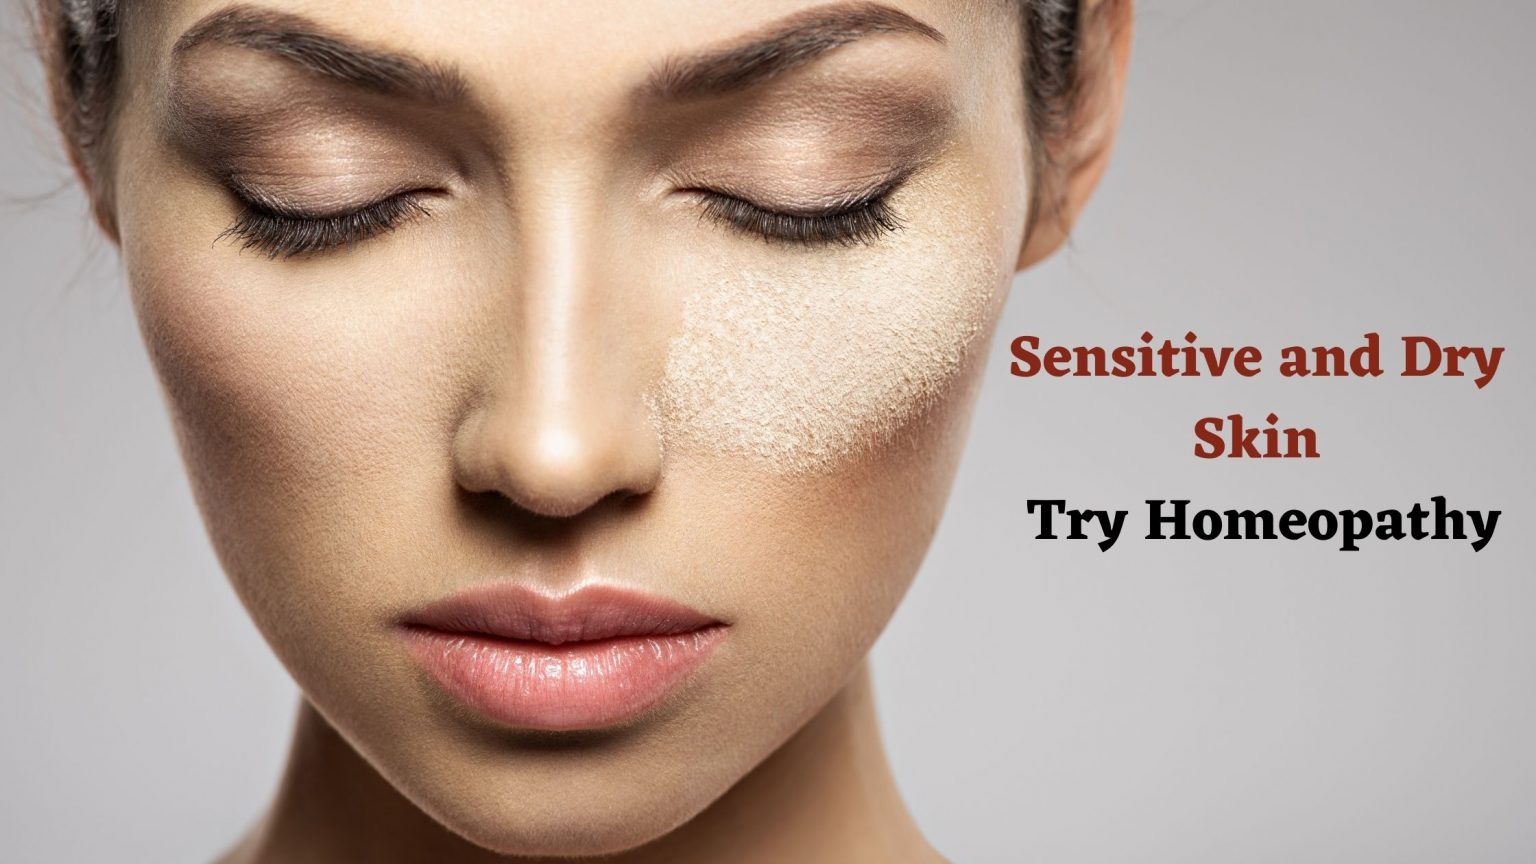 Sensitive and Dry Skin Try Homeopathy